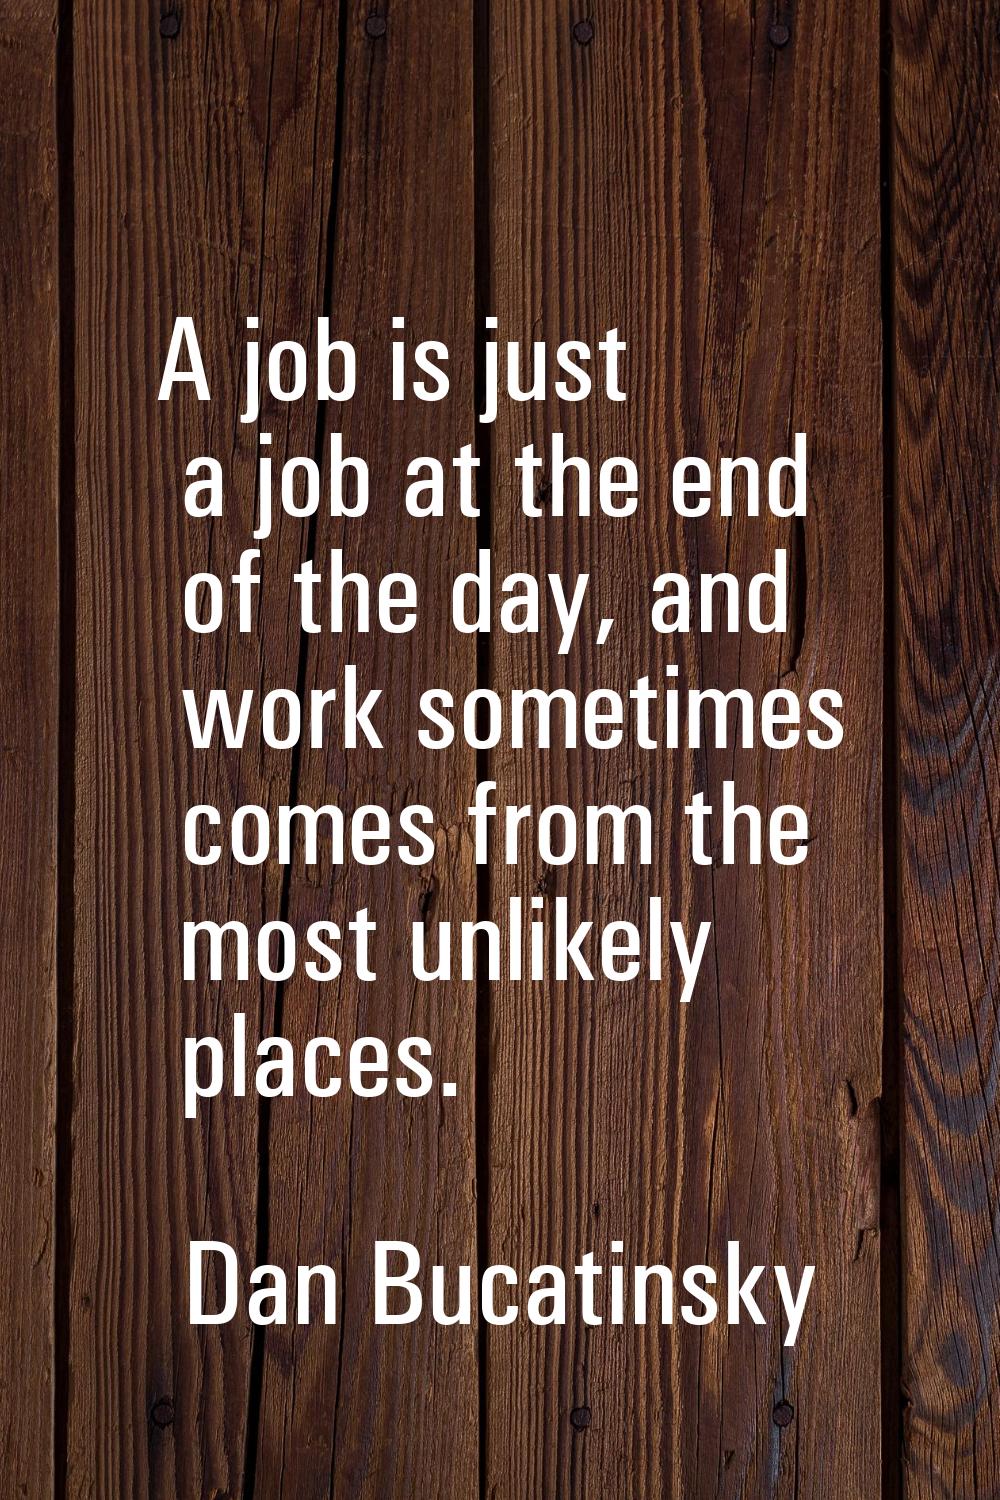 A job is just a job at the end of the day, and work sometimes comes from the most unlikely places.